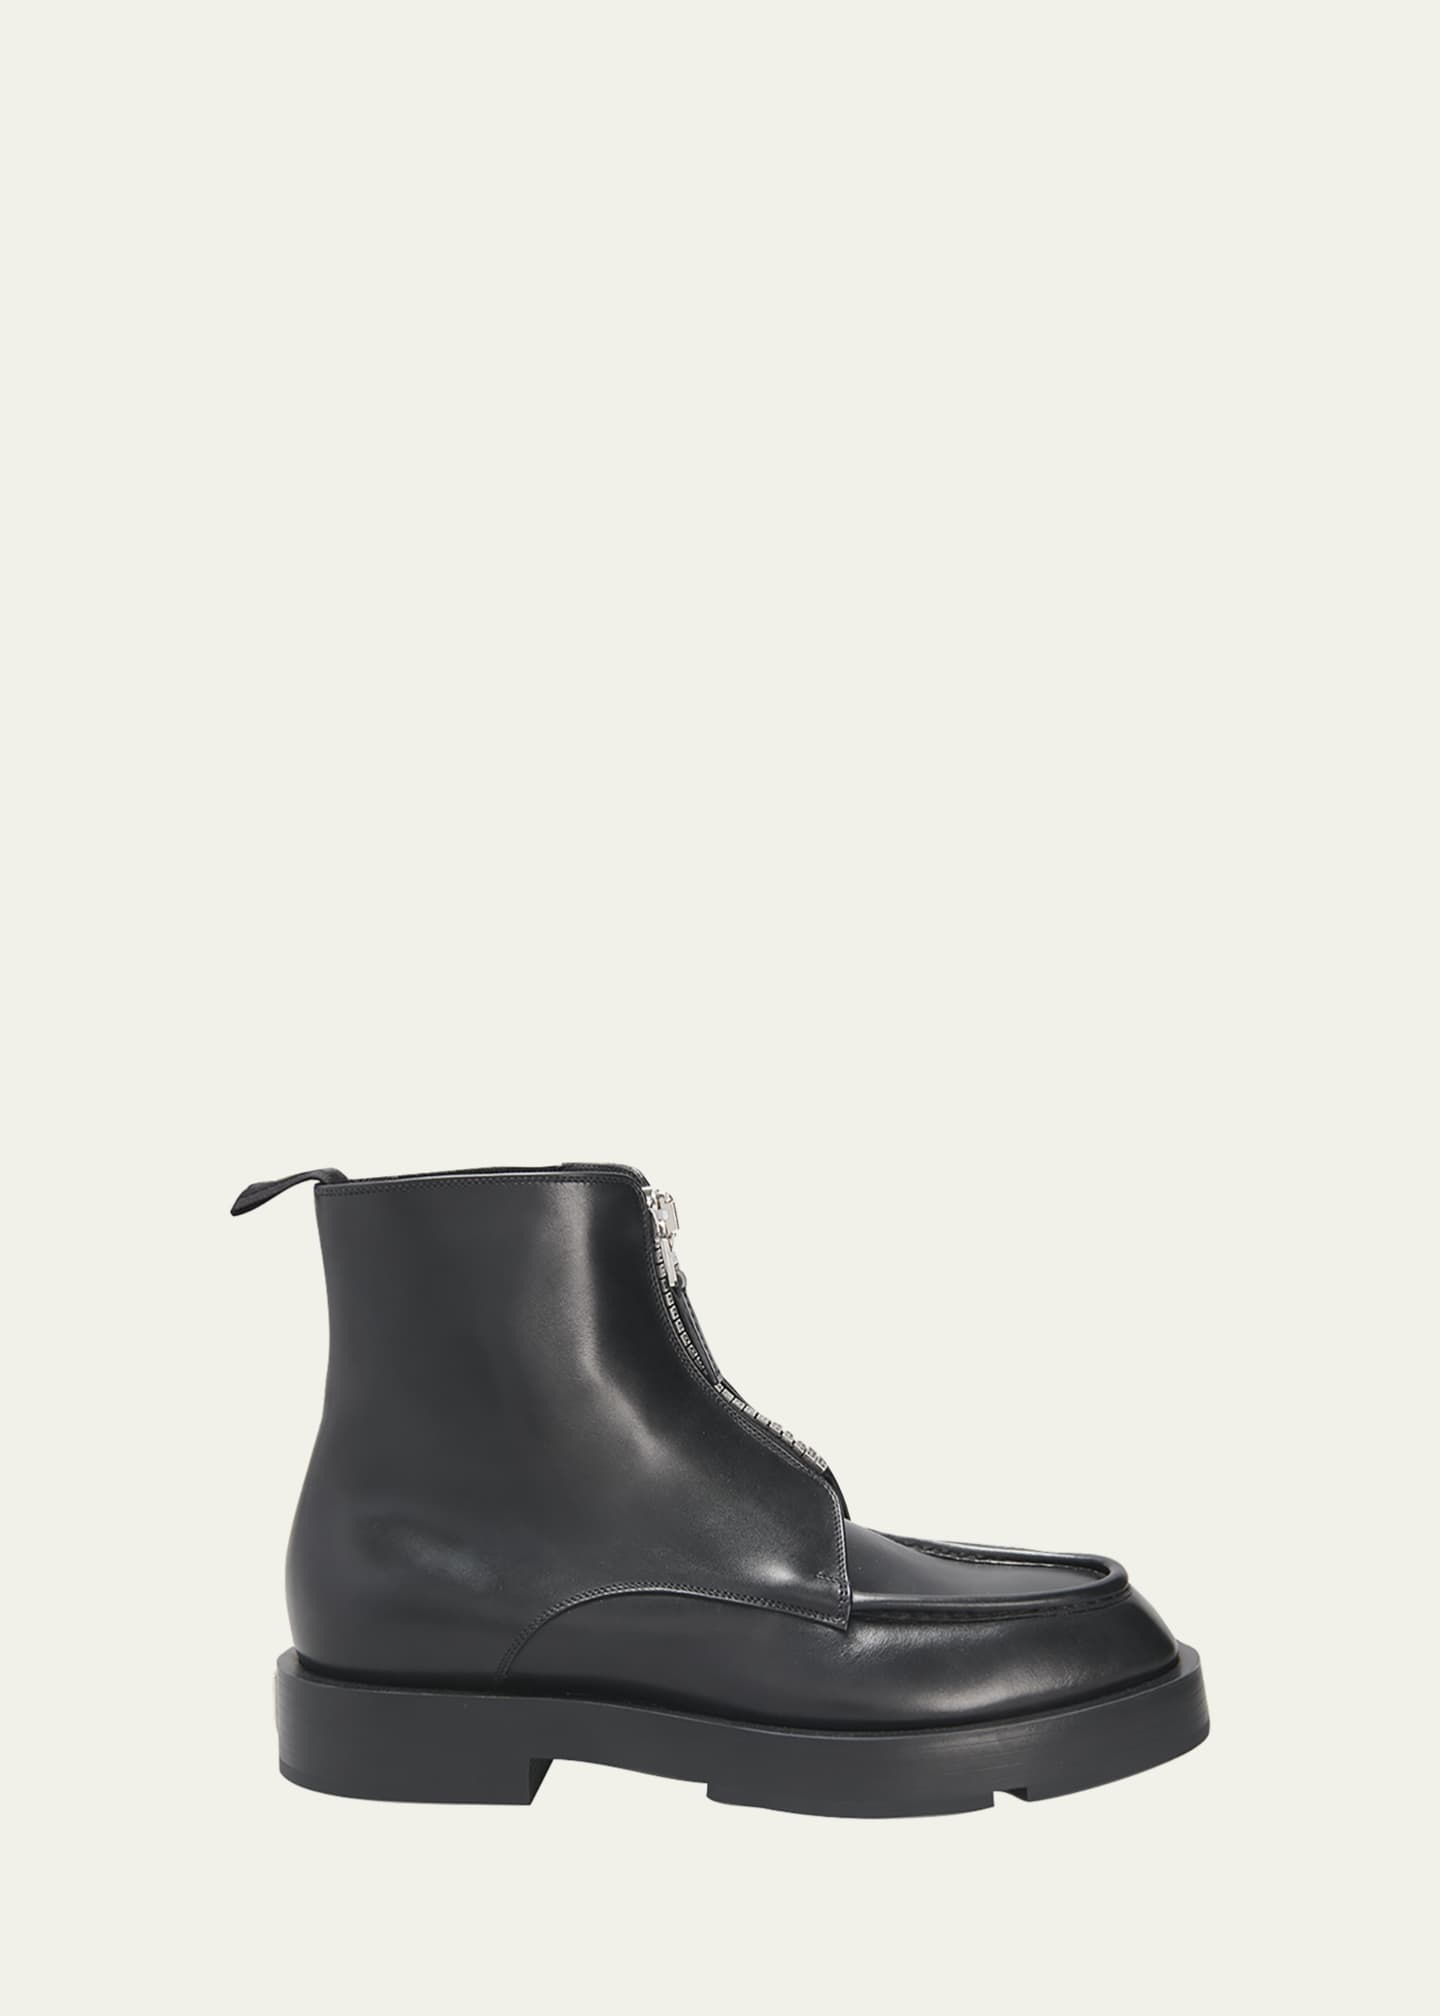 Givenchy Men's 4G-Zip Leather Combat Ankle Boots - Bergdorf Goodman